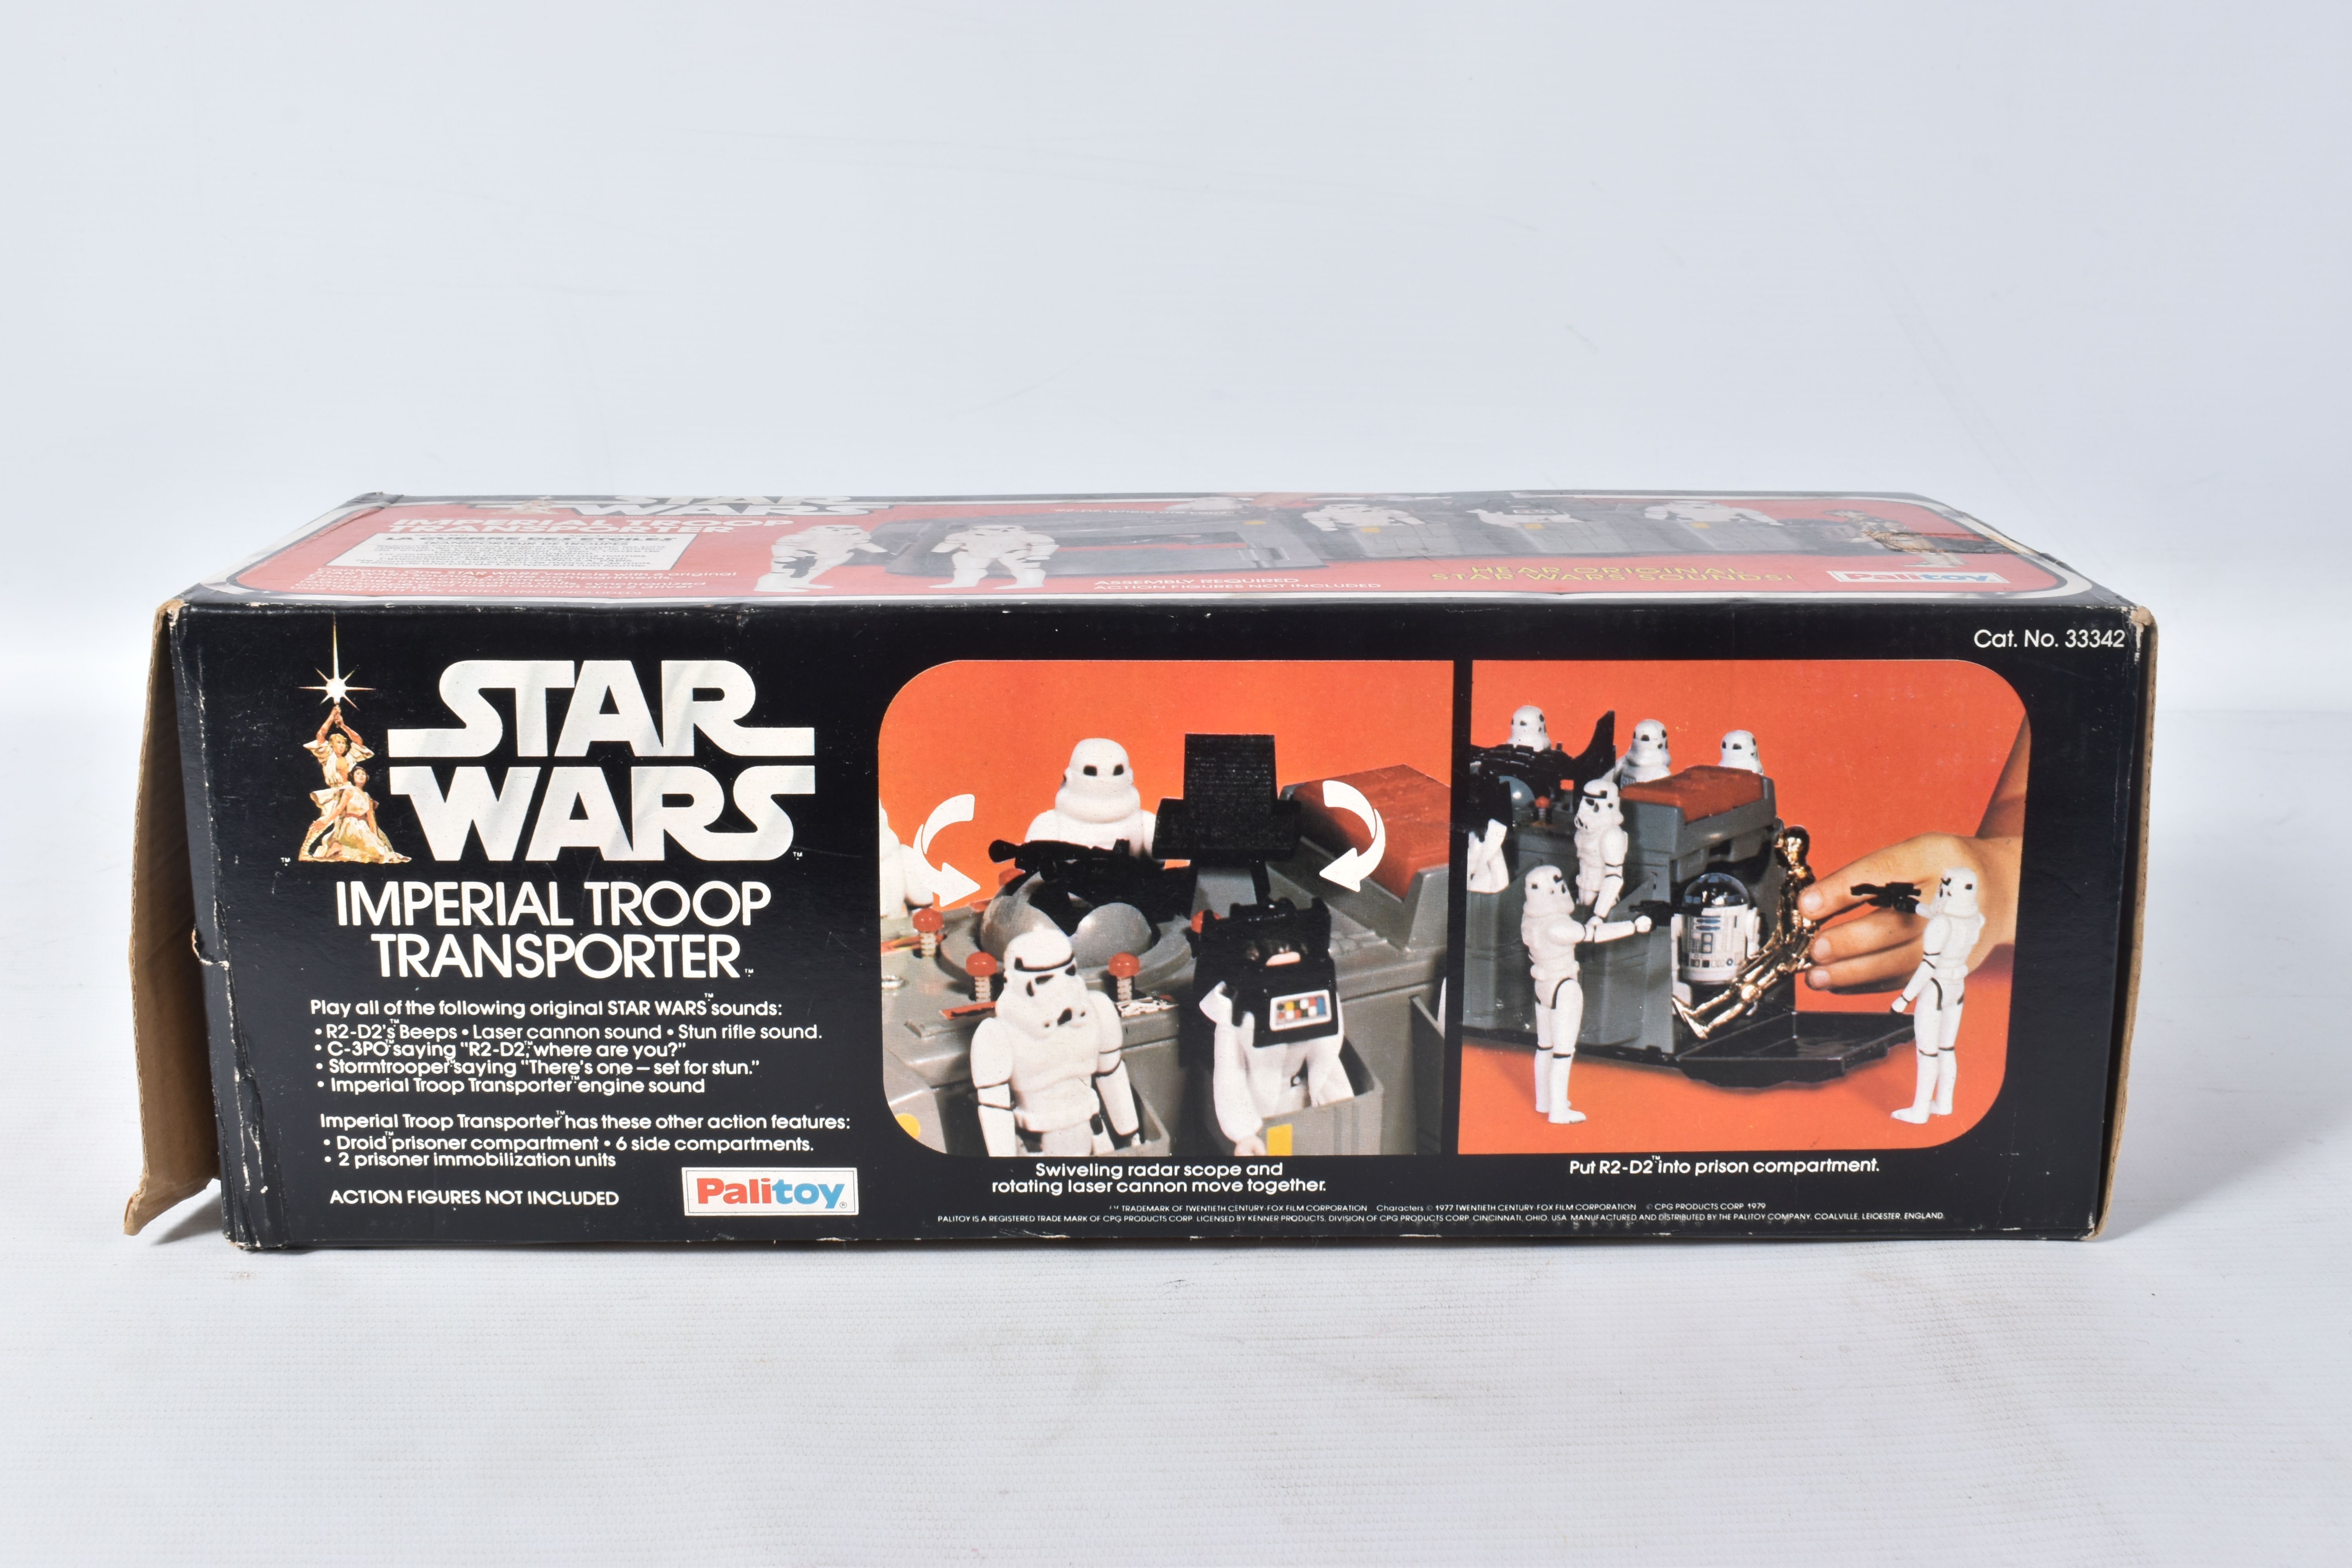 A BOXED PALITOY STAR WARS IMPERIAL TROOP TRANSPORTER, no. 33342, Sellotape has been removed from - Image 13 of 14